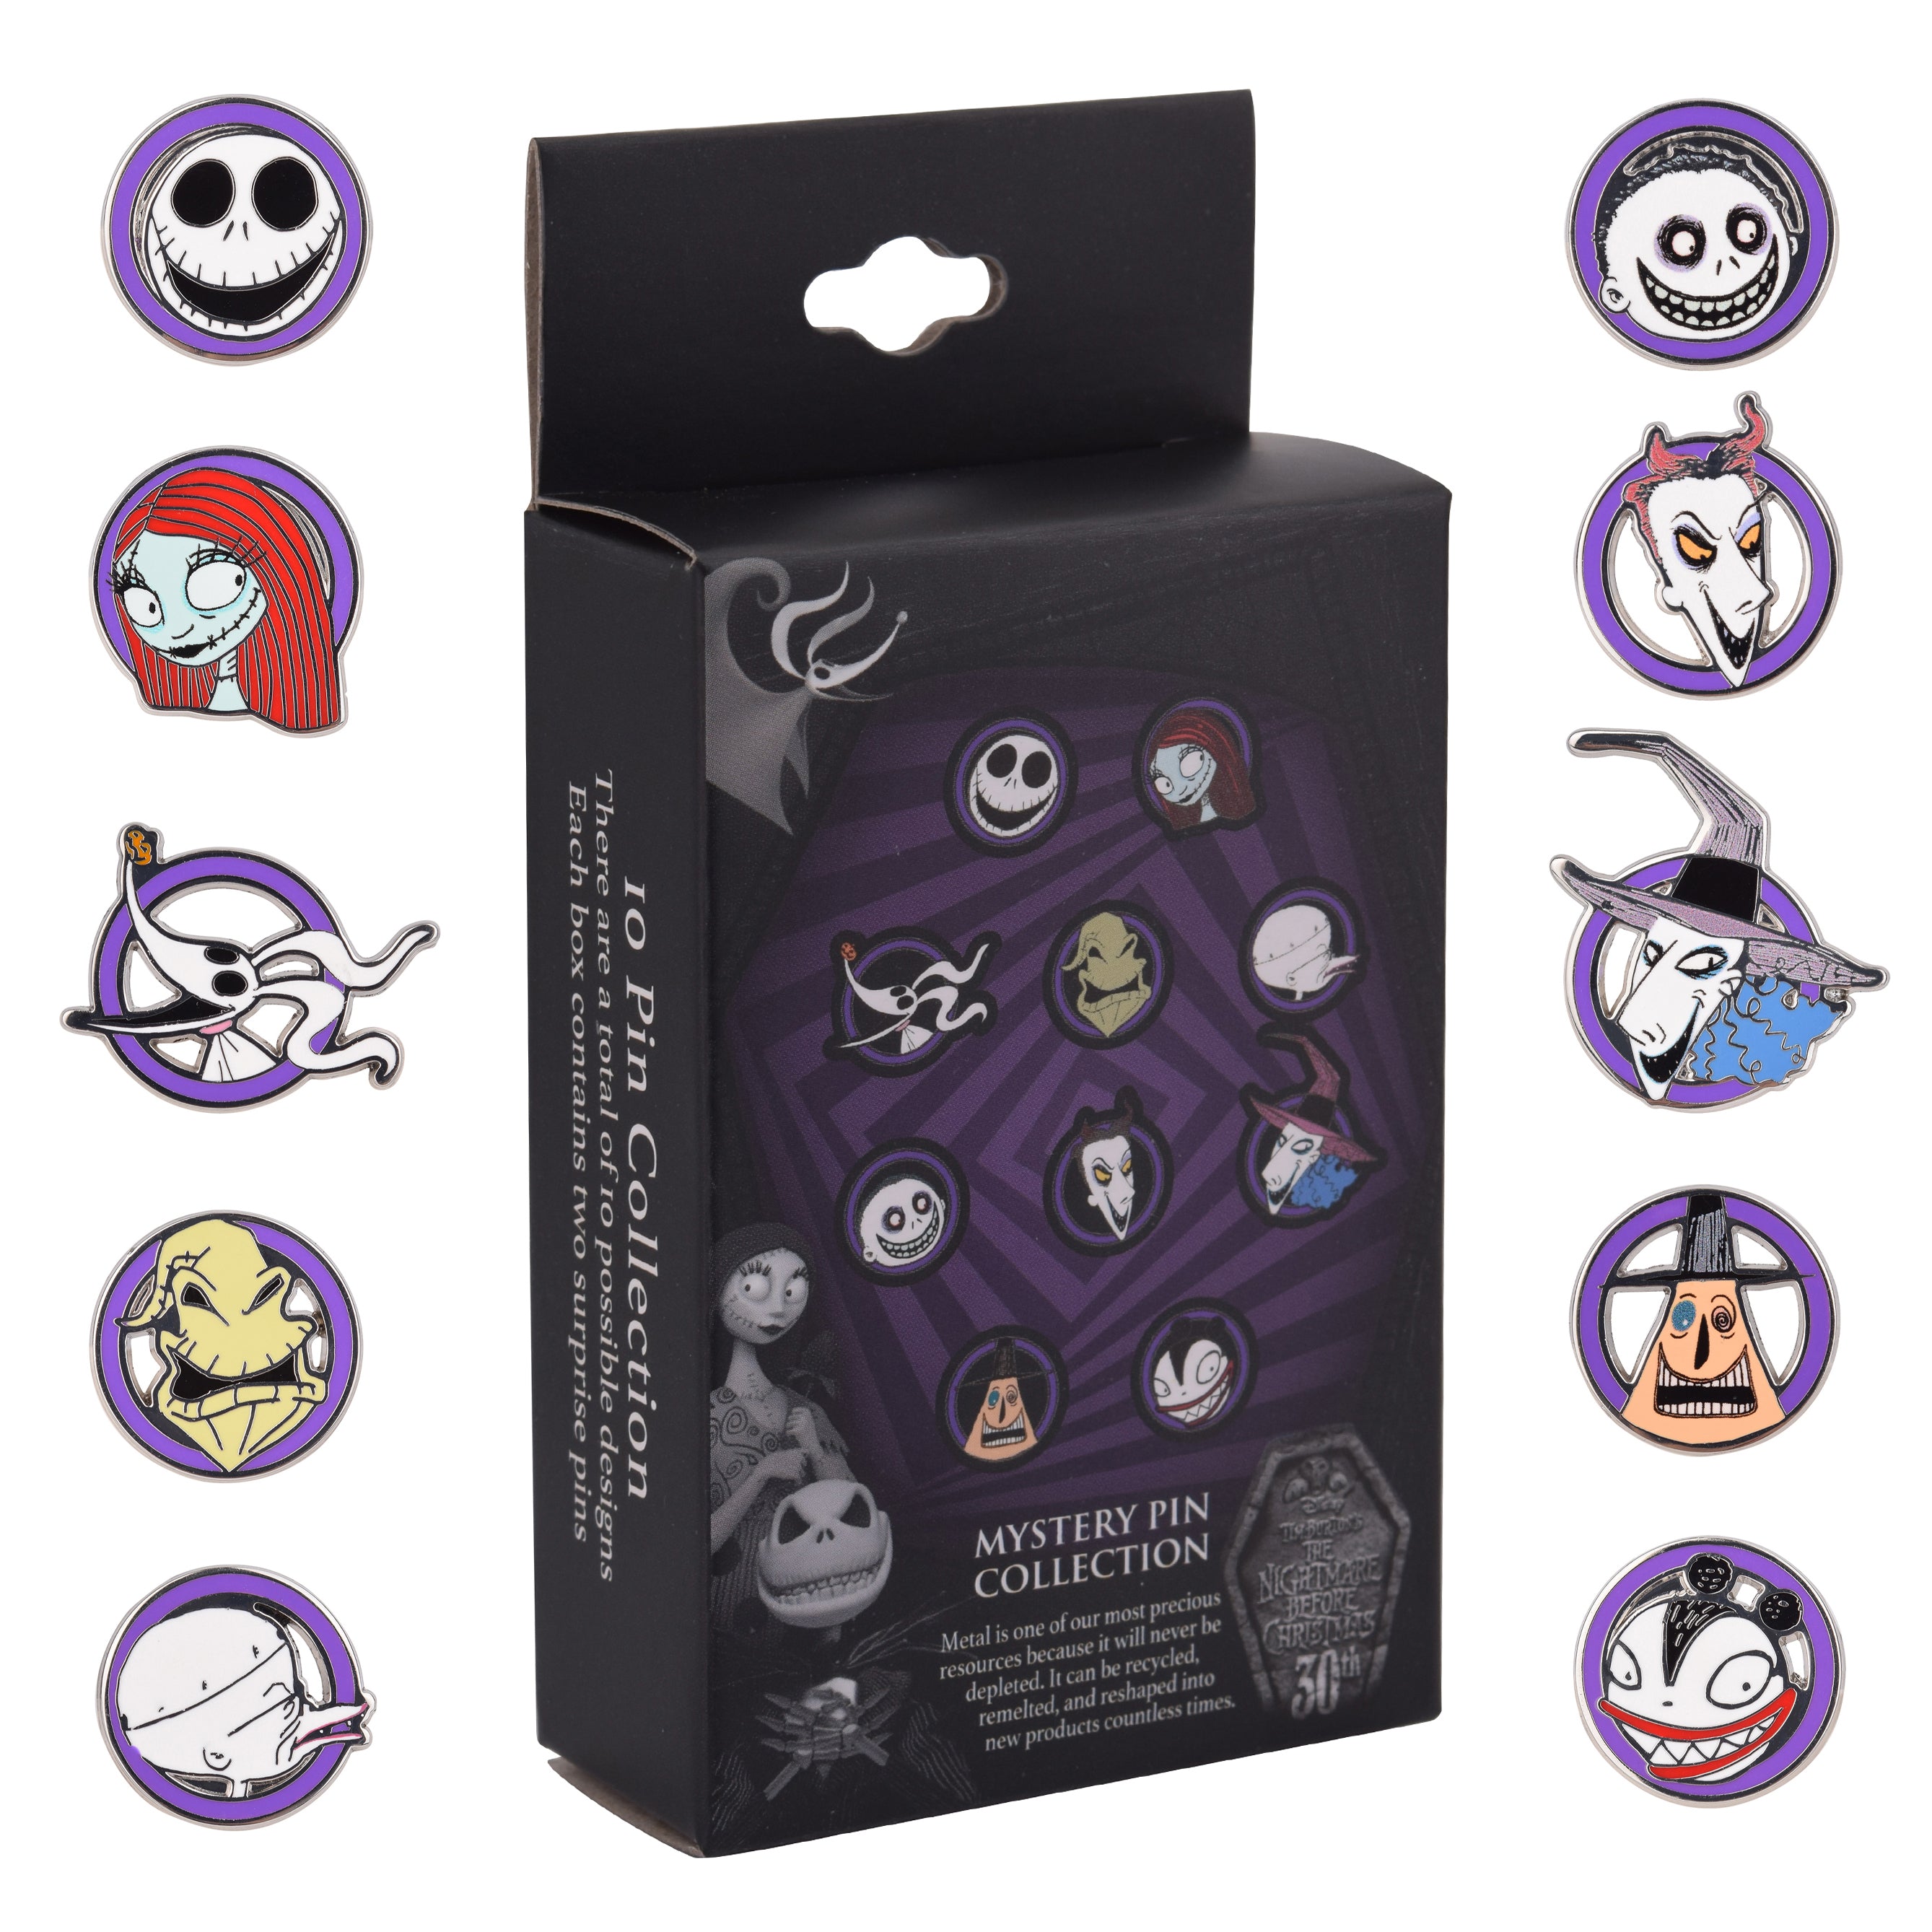 Nightmare Before Christmas 30th Anniversary Micro Mystery Pins Limited Edition 300 (2 pins per box!)